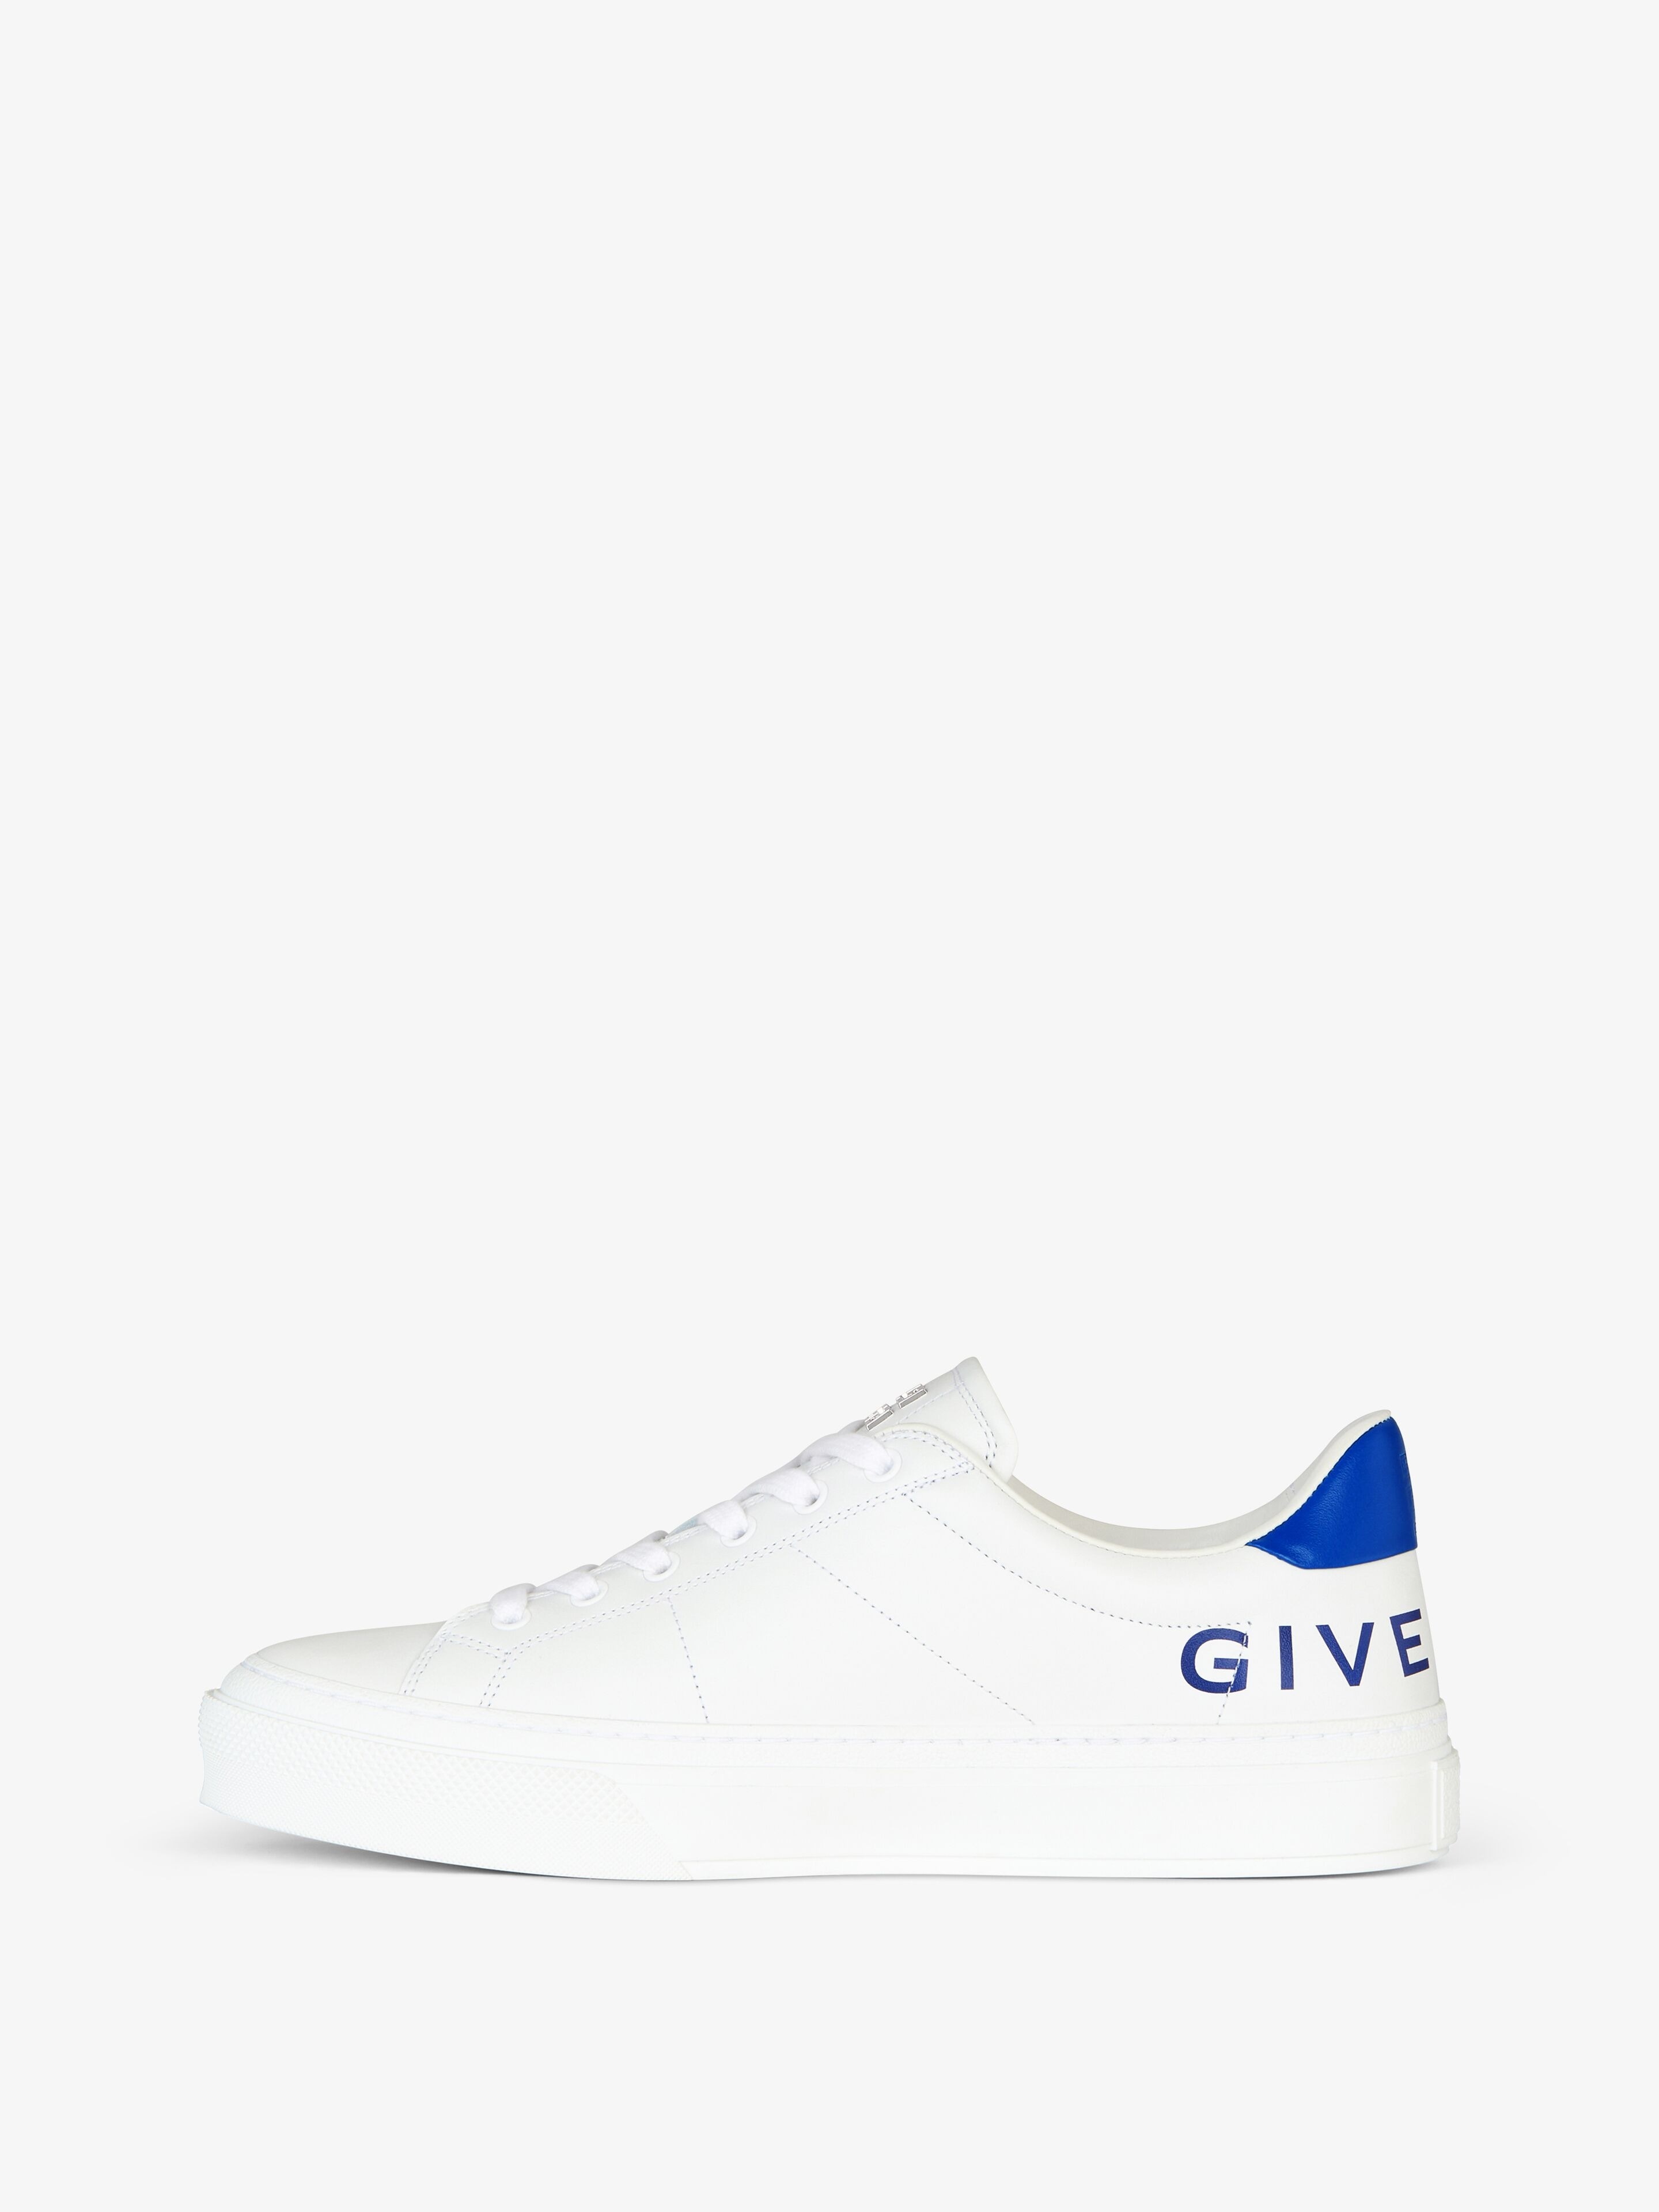 GIVENCHY CITY SPORT SNEAKERS IN LEATHER - 3